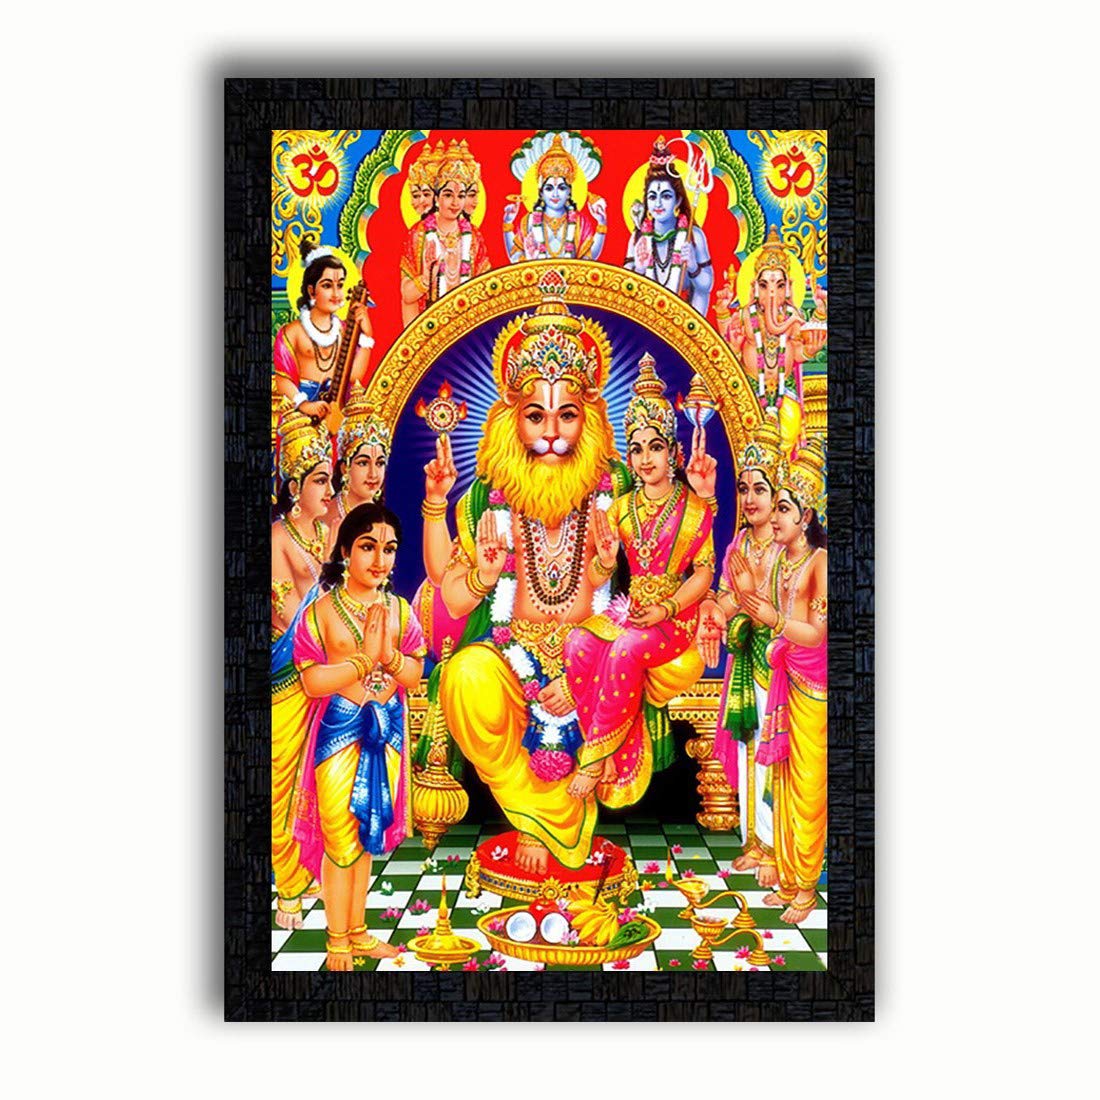 PNF Abstract Themed Narsingh Bhagwan with Wooden Synthetic Frame Painting, Multicolour, 14 x 20 inch, Medium, Amazon.in: Home & Kitchen